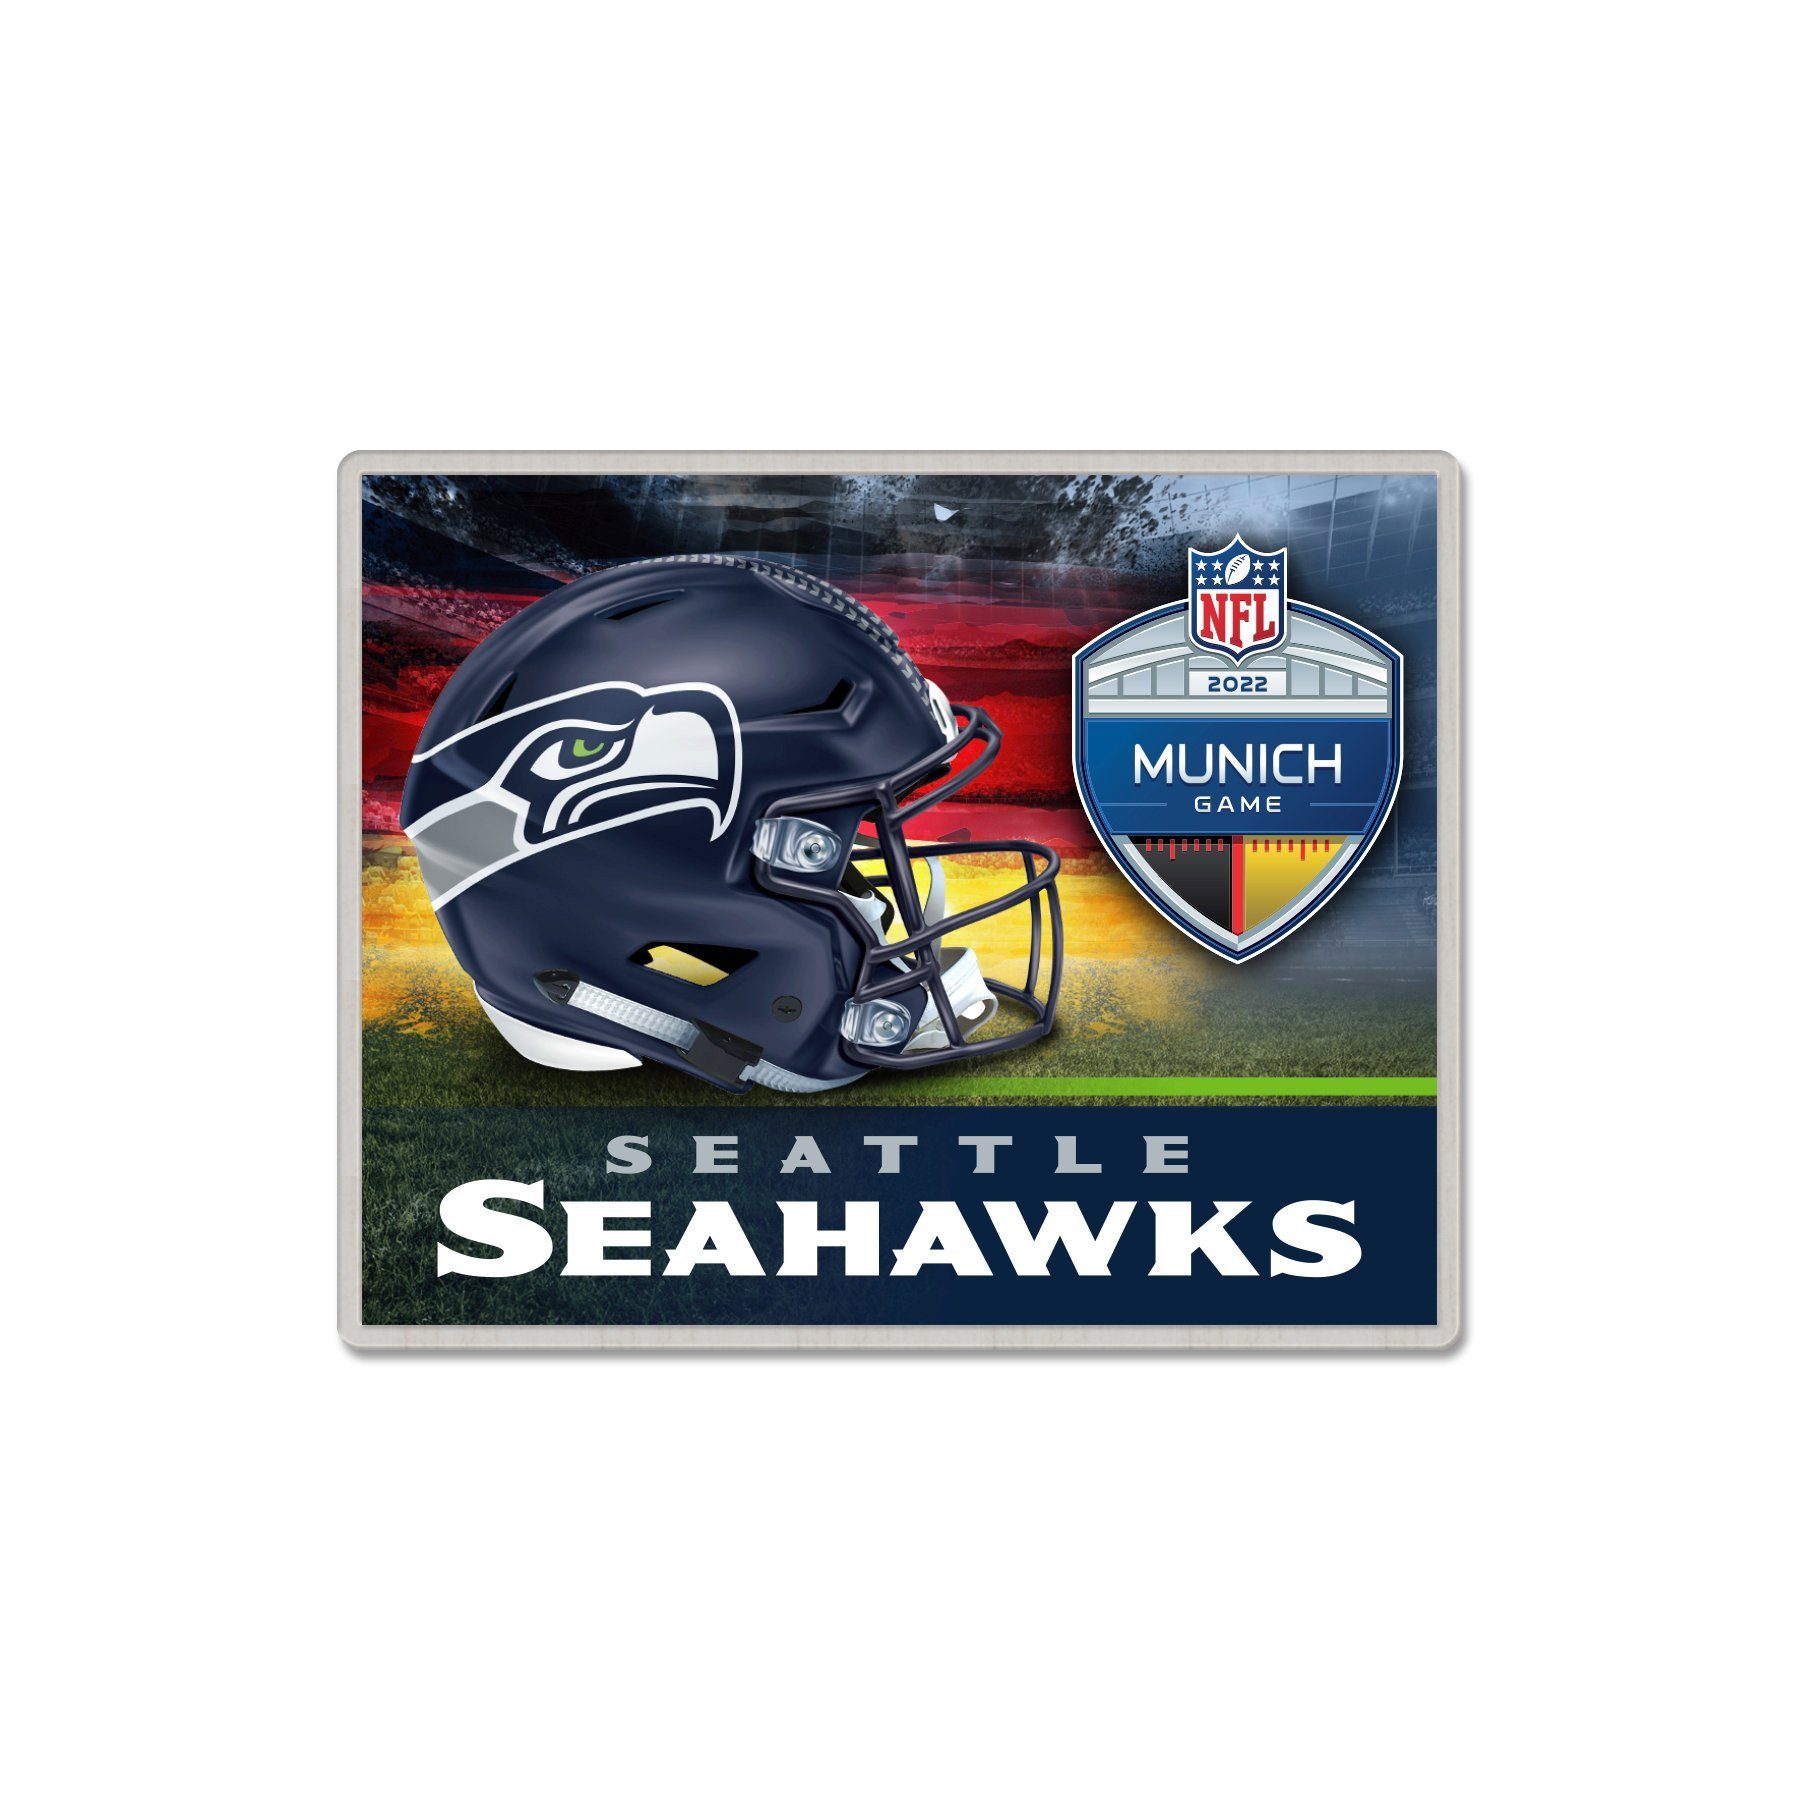 WinCraft Pins NFL Pin Badge Seahawks Seattle NFL